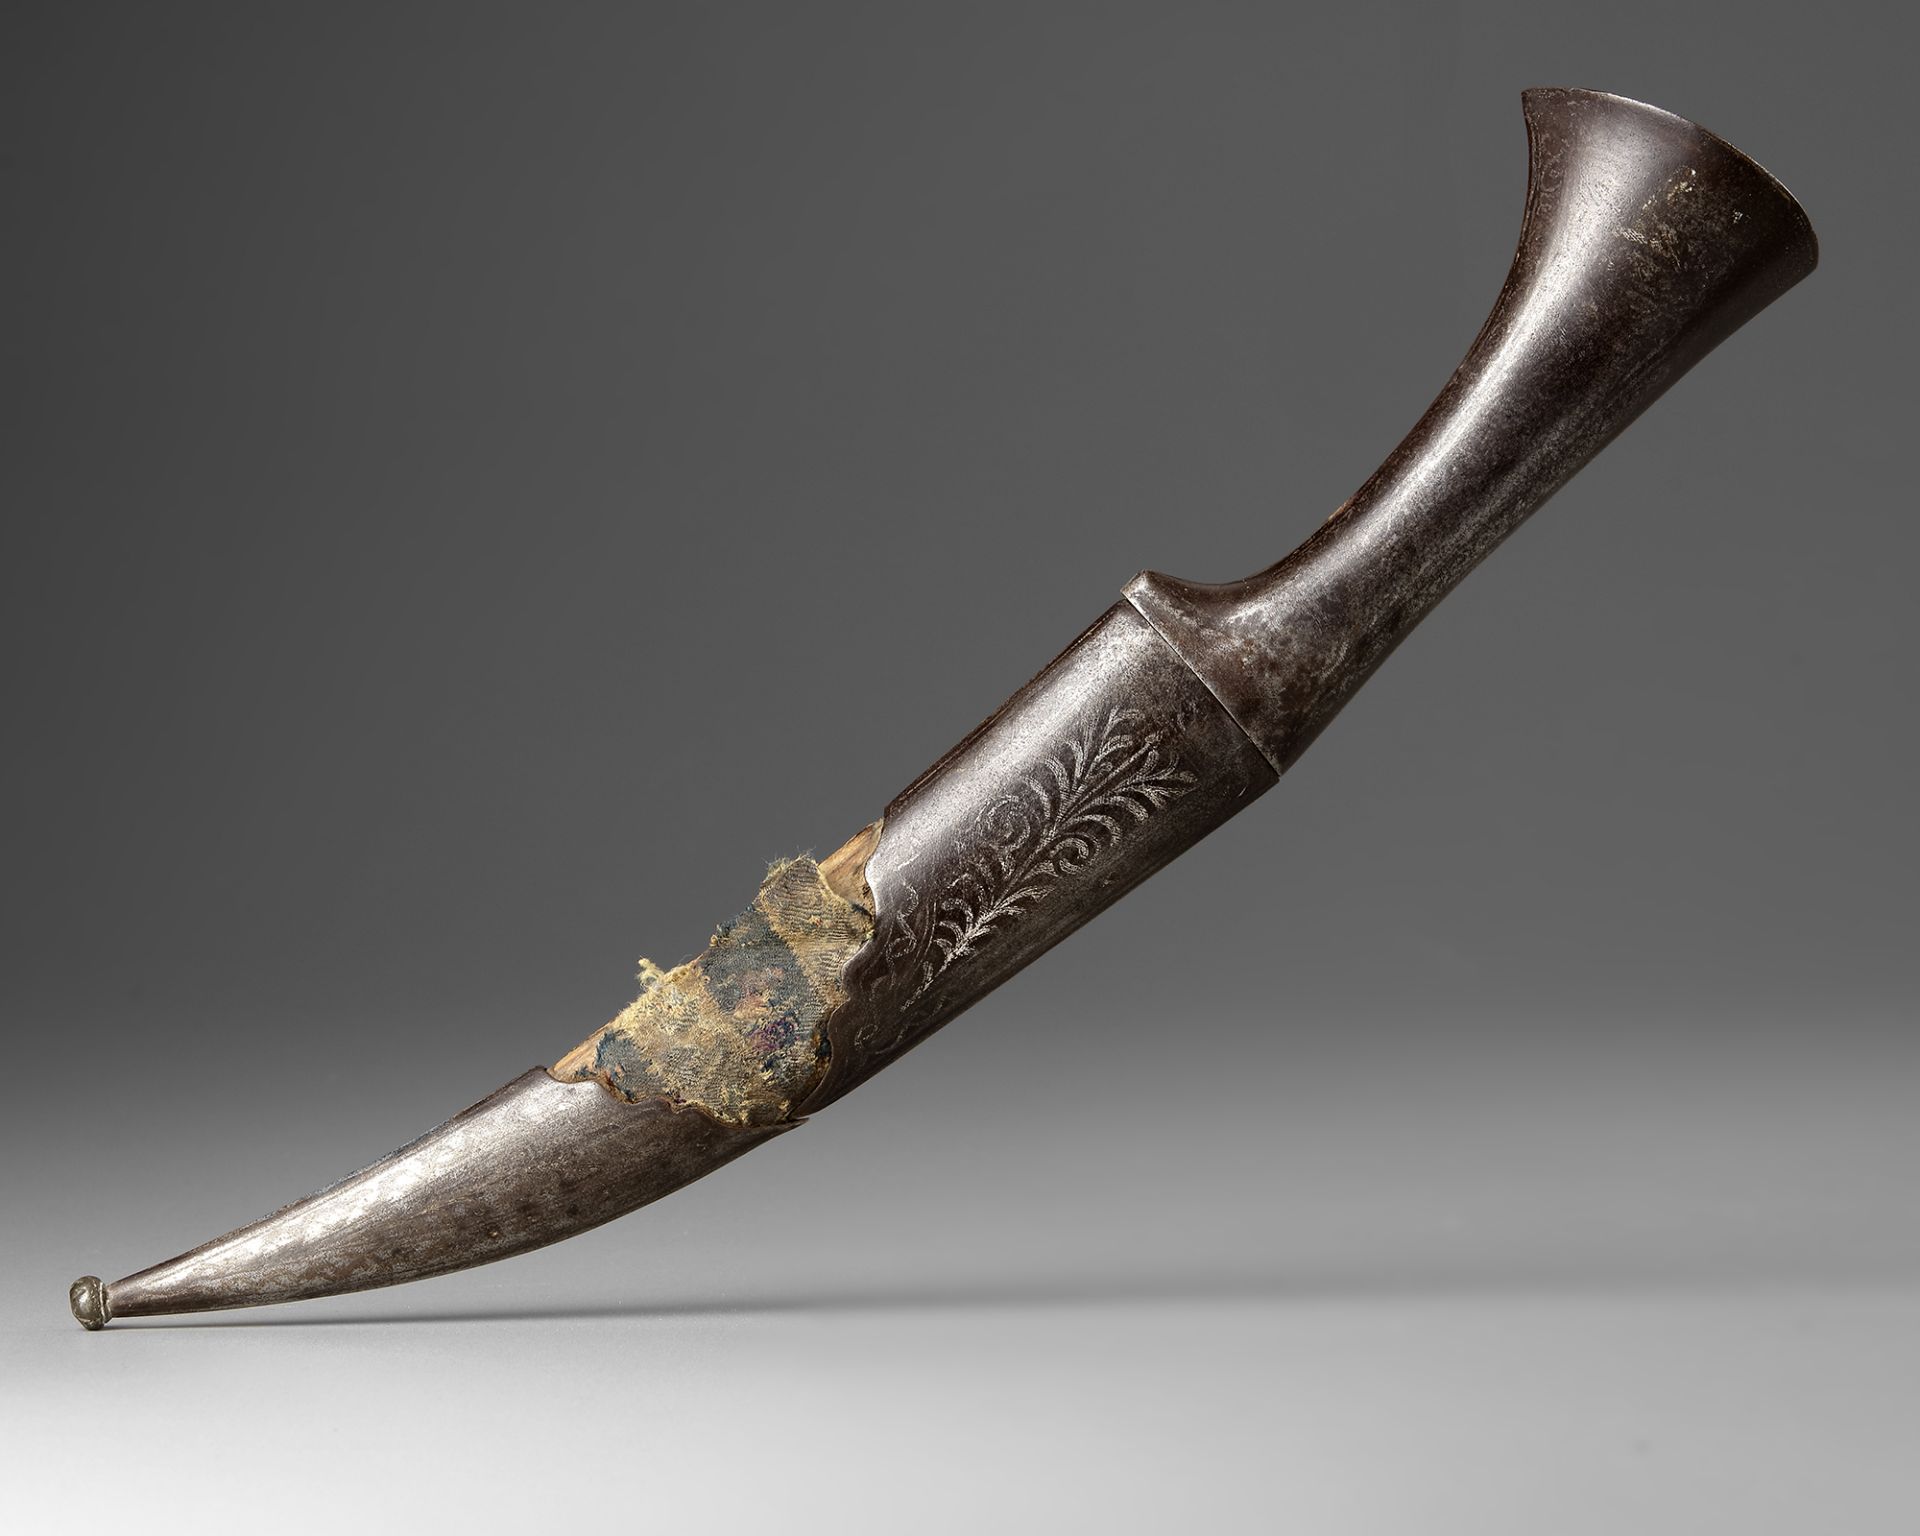 A MUGHAL DAGGER AND SHEATH MADE FOR THE OTTOMAN MARKET, DECCAN 18TH CENTURY - Image 2 of 4